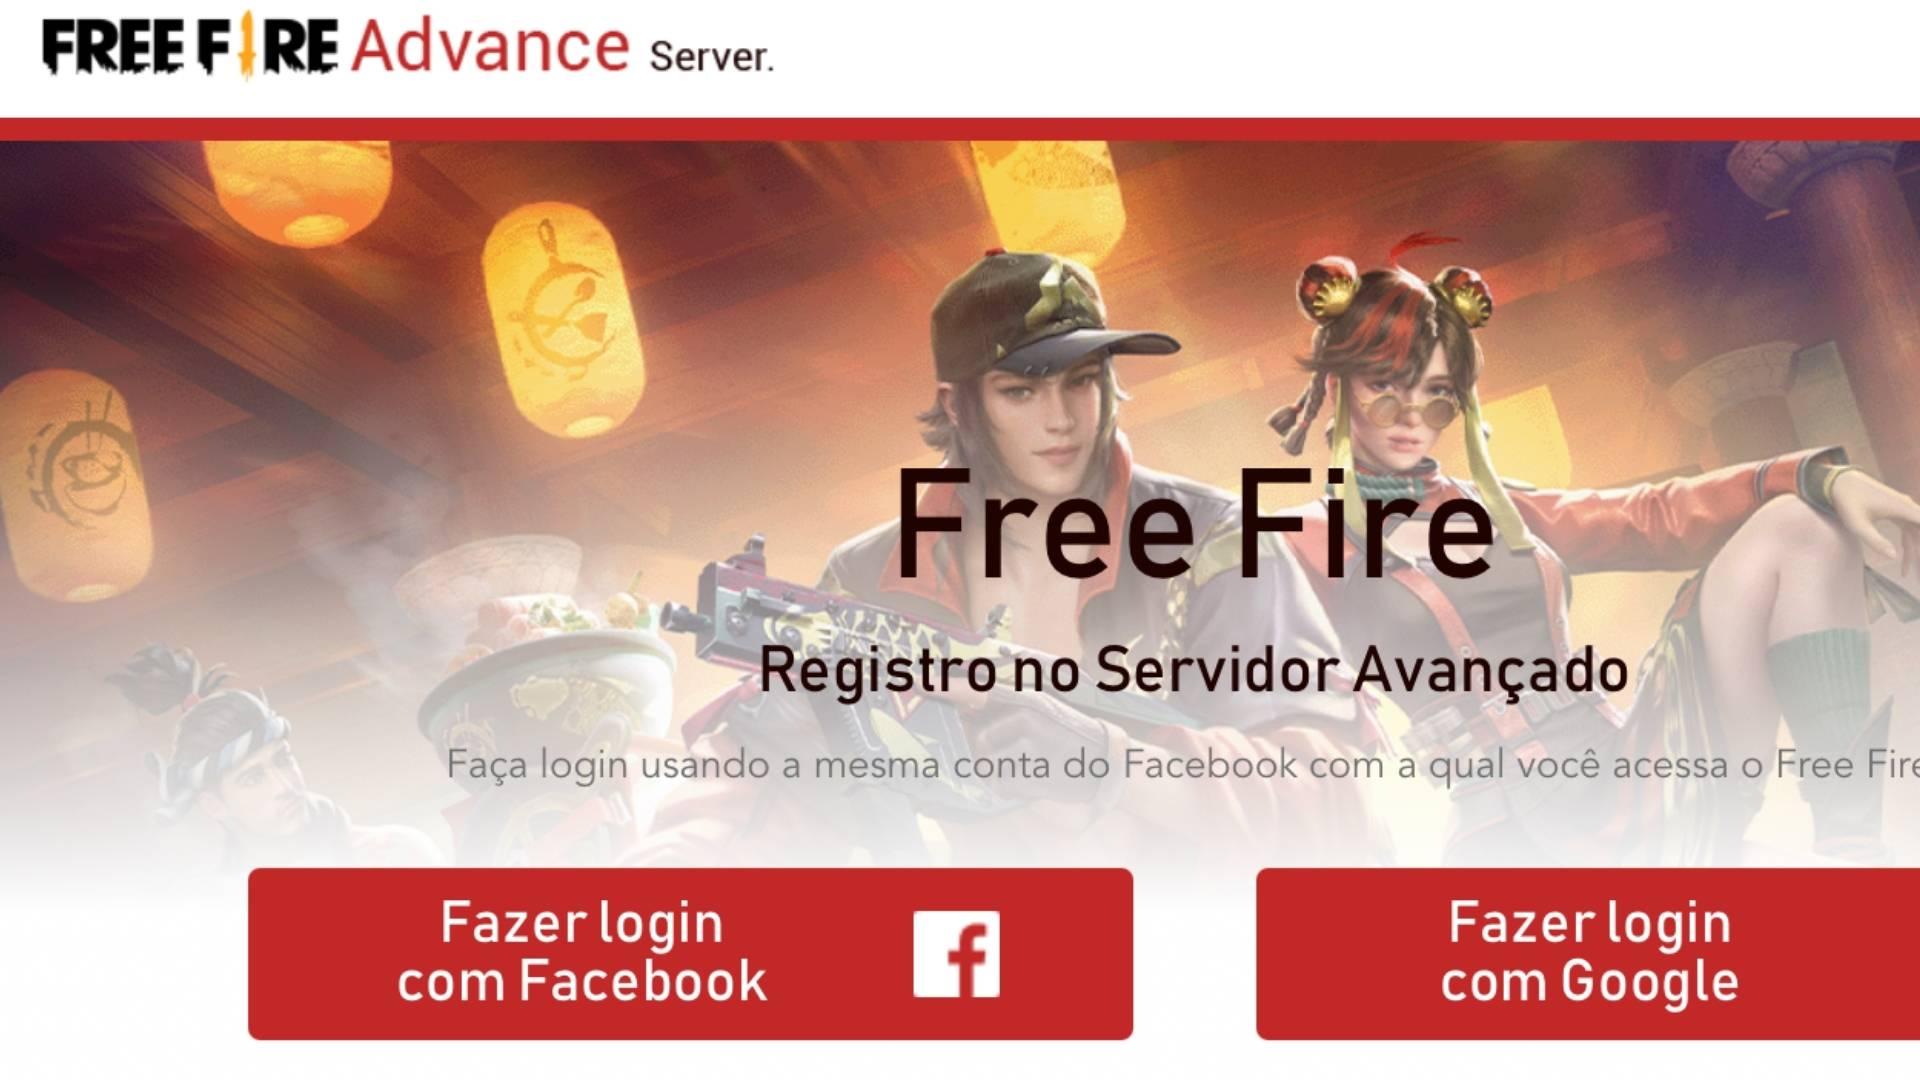 Free Fire Advanced Server July 2022: download, date, registration and more details revealed